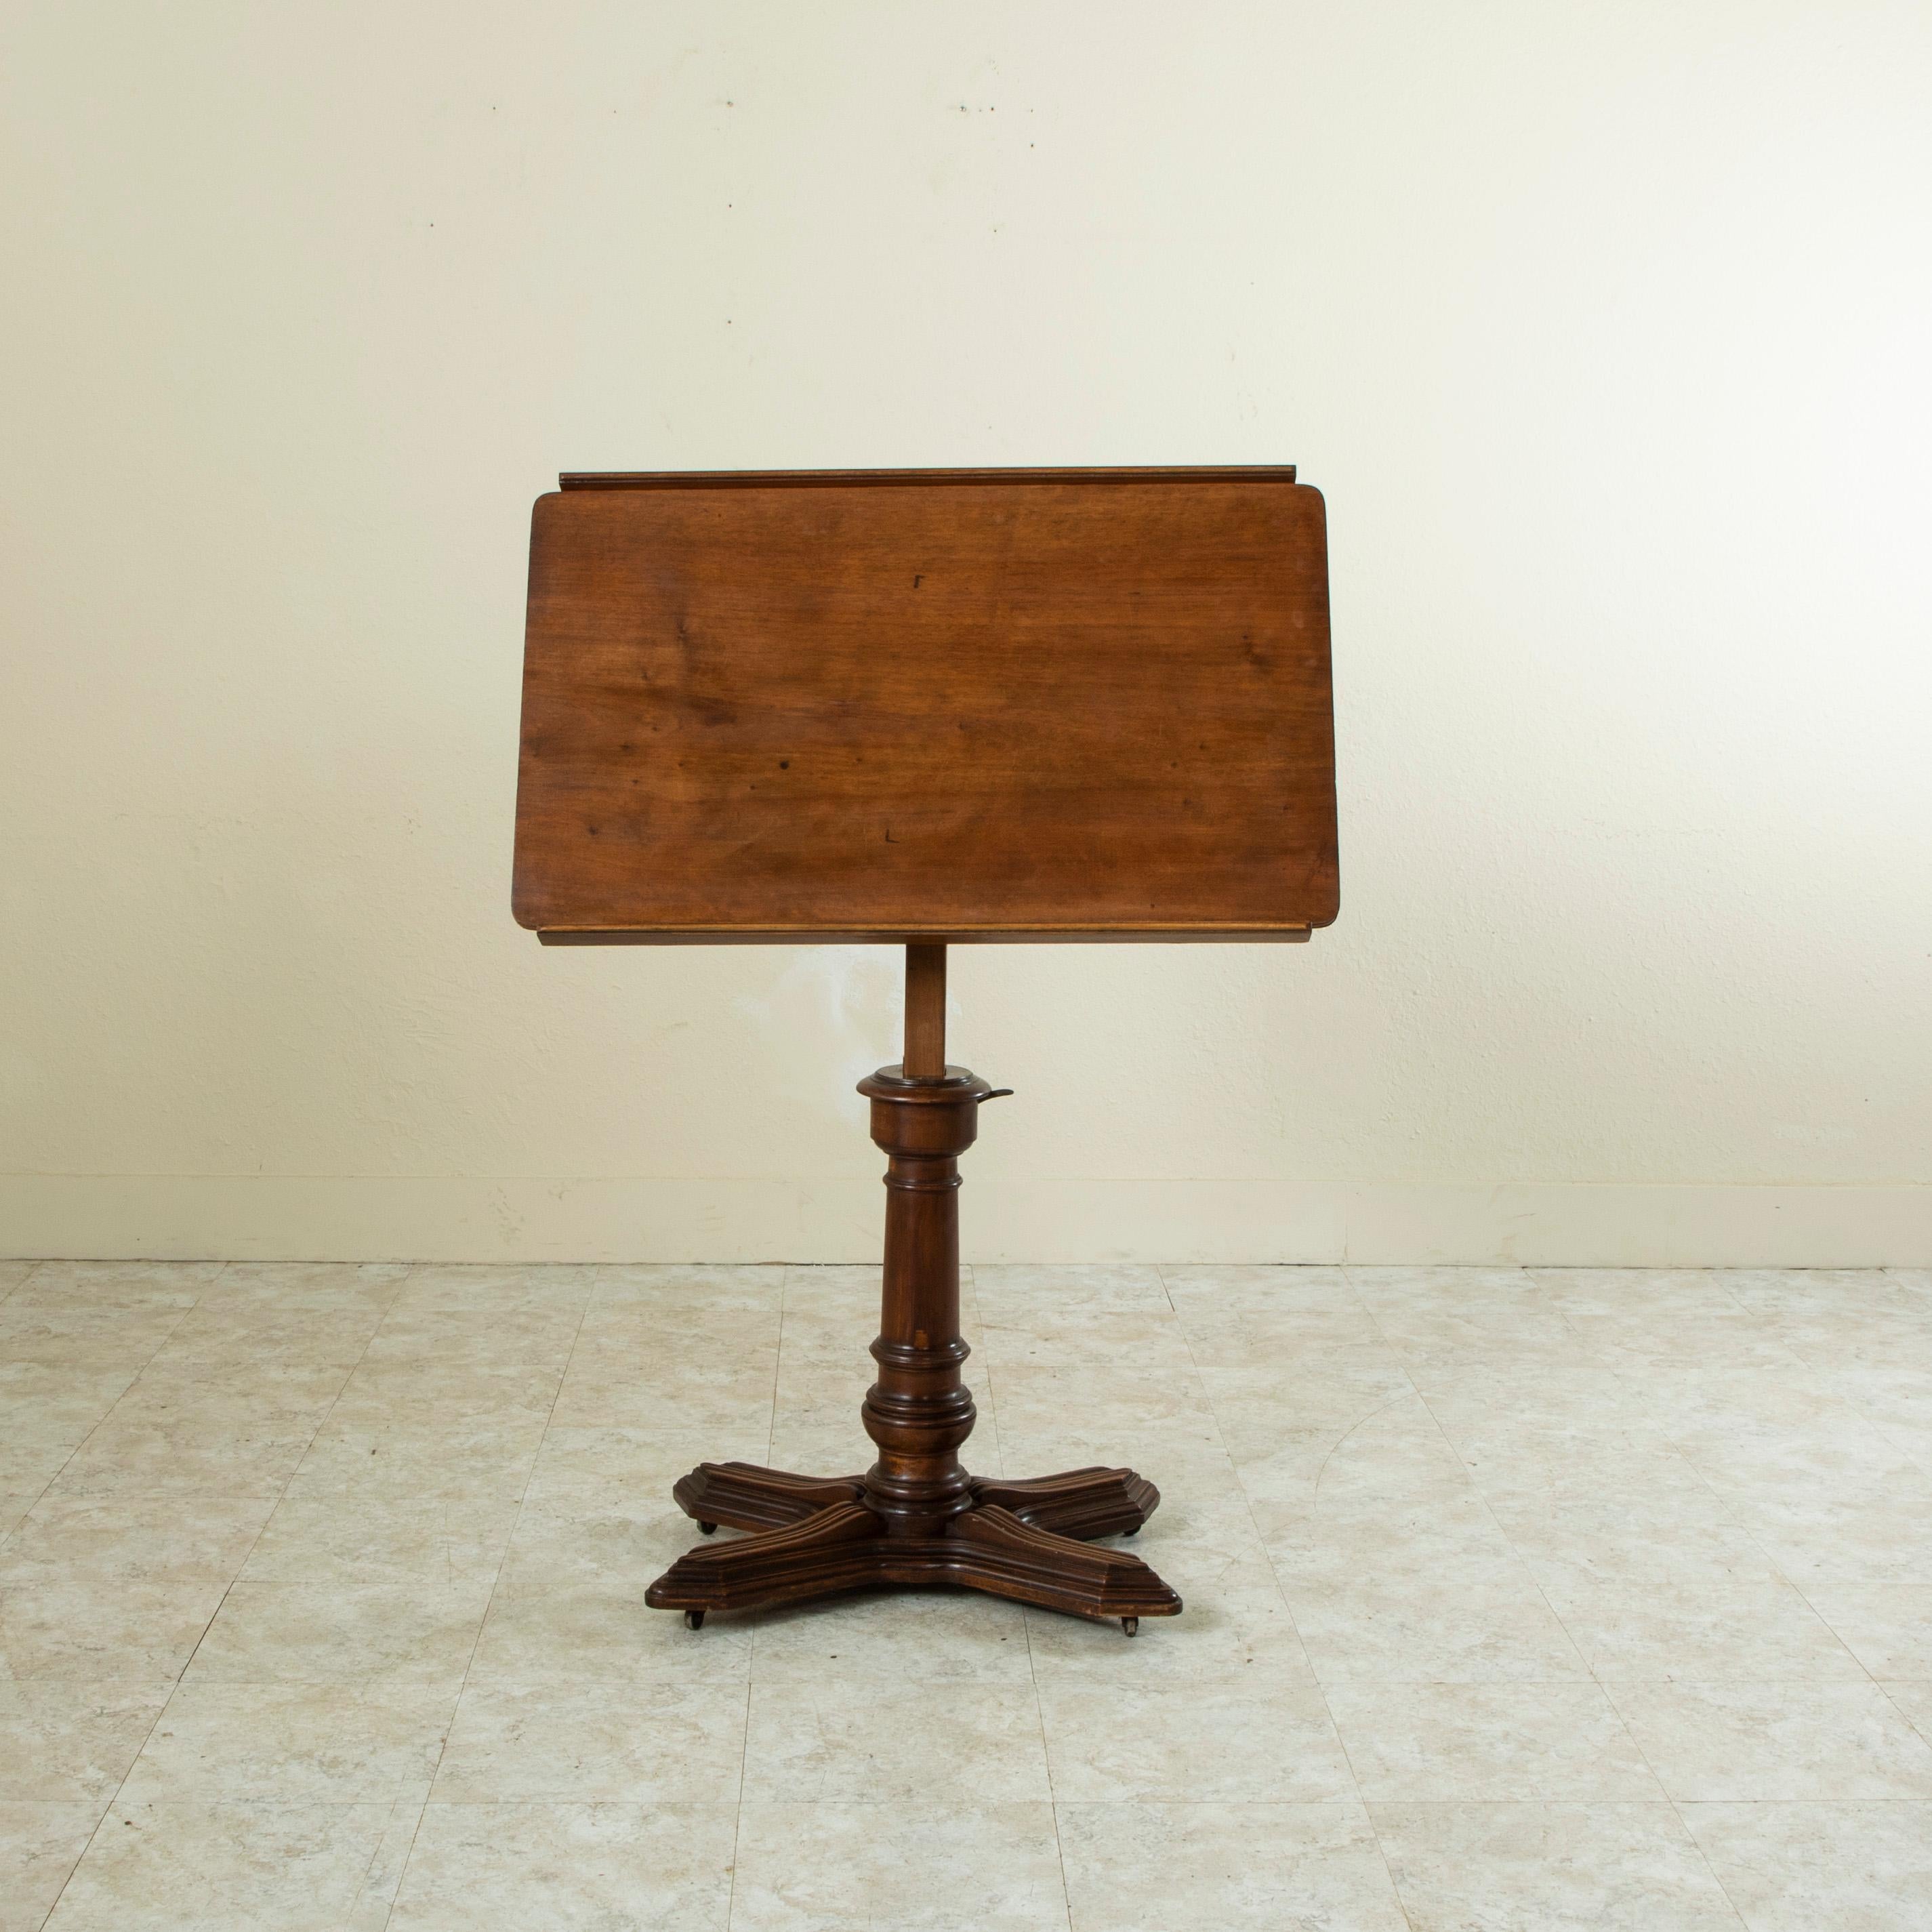 This late nineteenth century French walnut adjustable architect’s drafting table features the maker's label, E. Chouanard. The table top adjusts in pitch, height, as well as right and left orientation, and is supported by a turned central column on